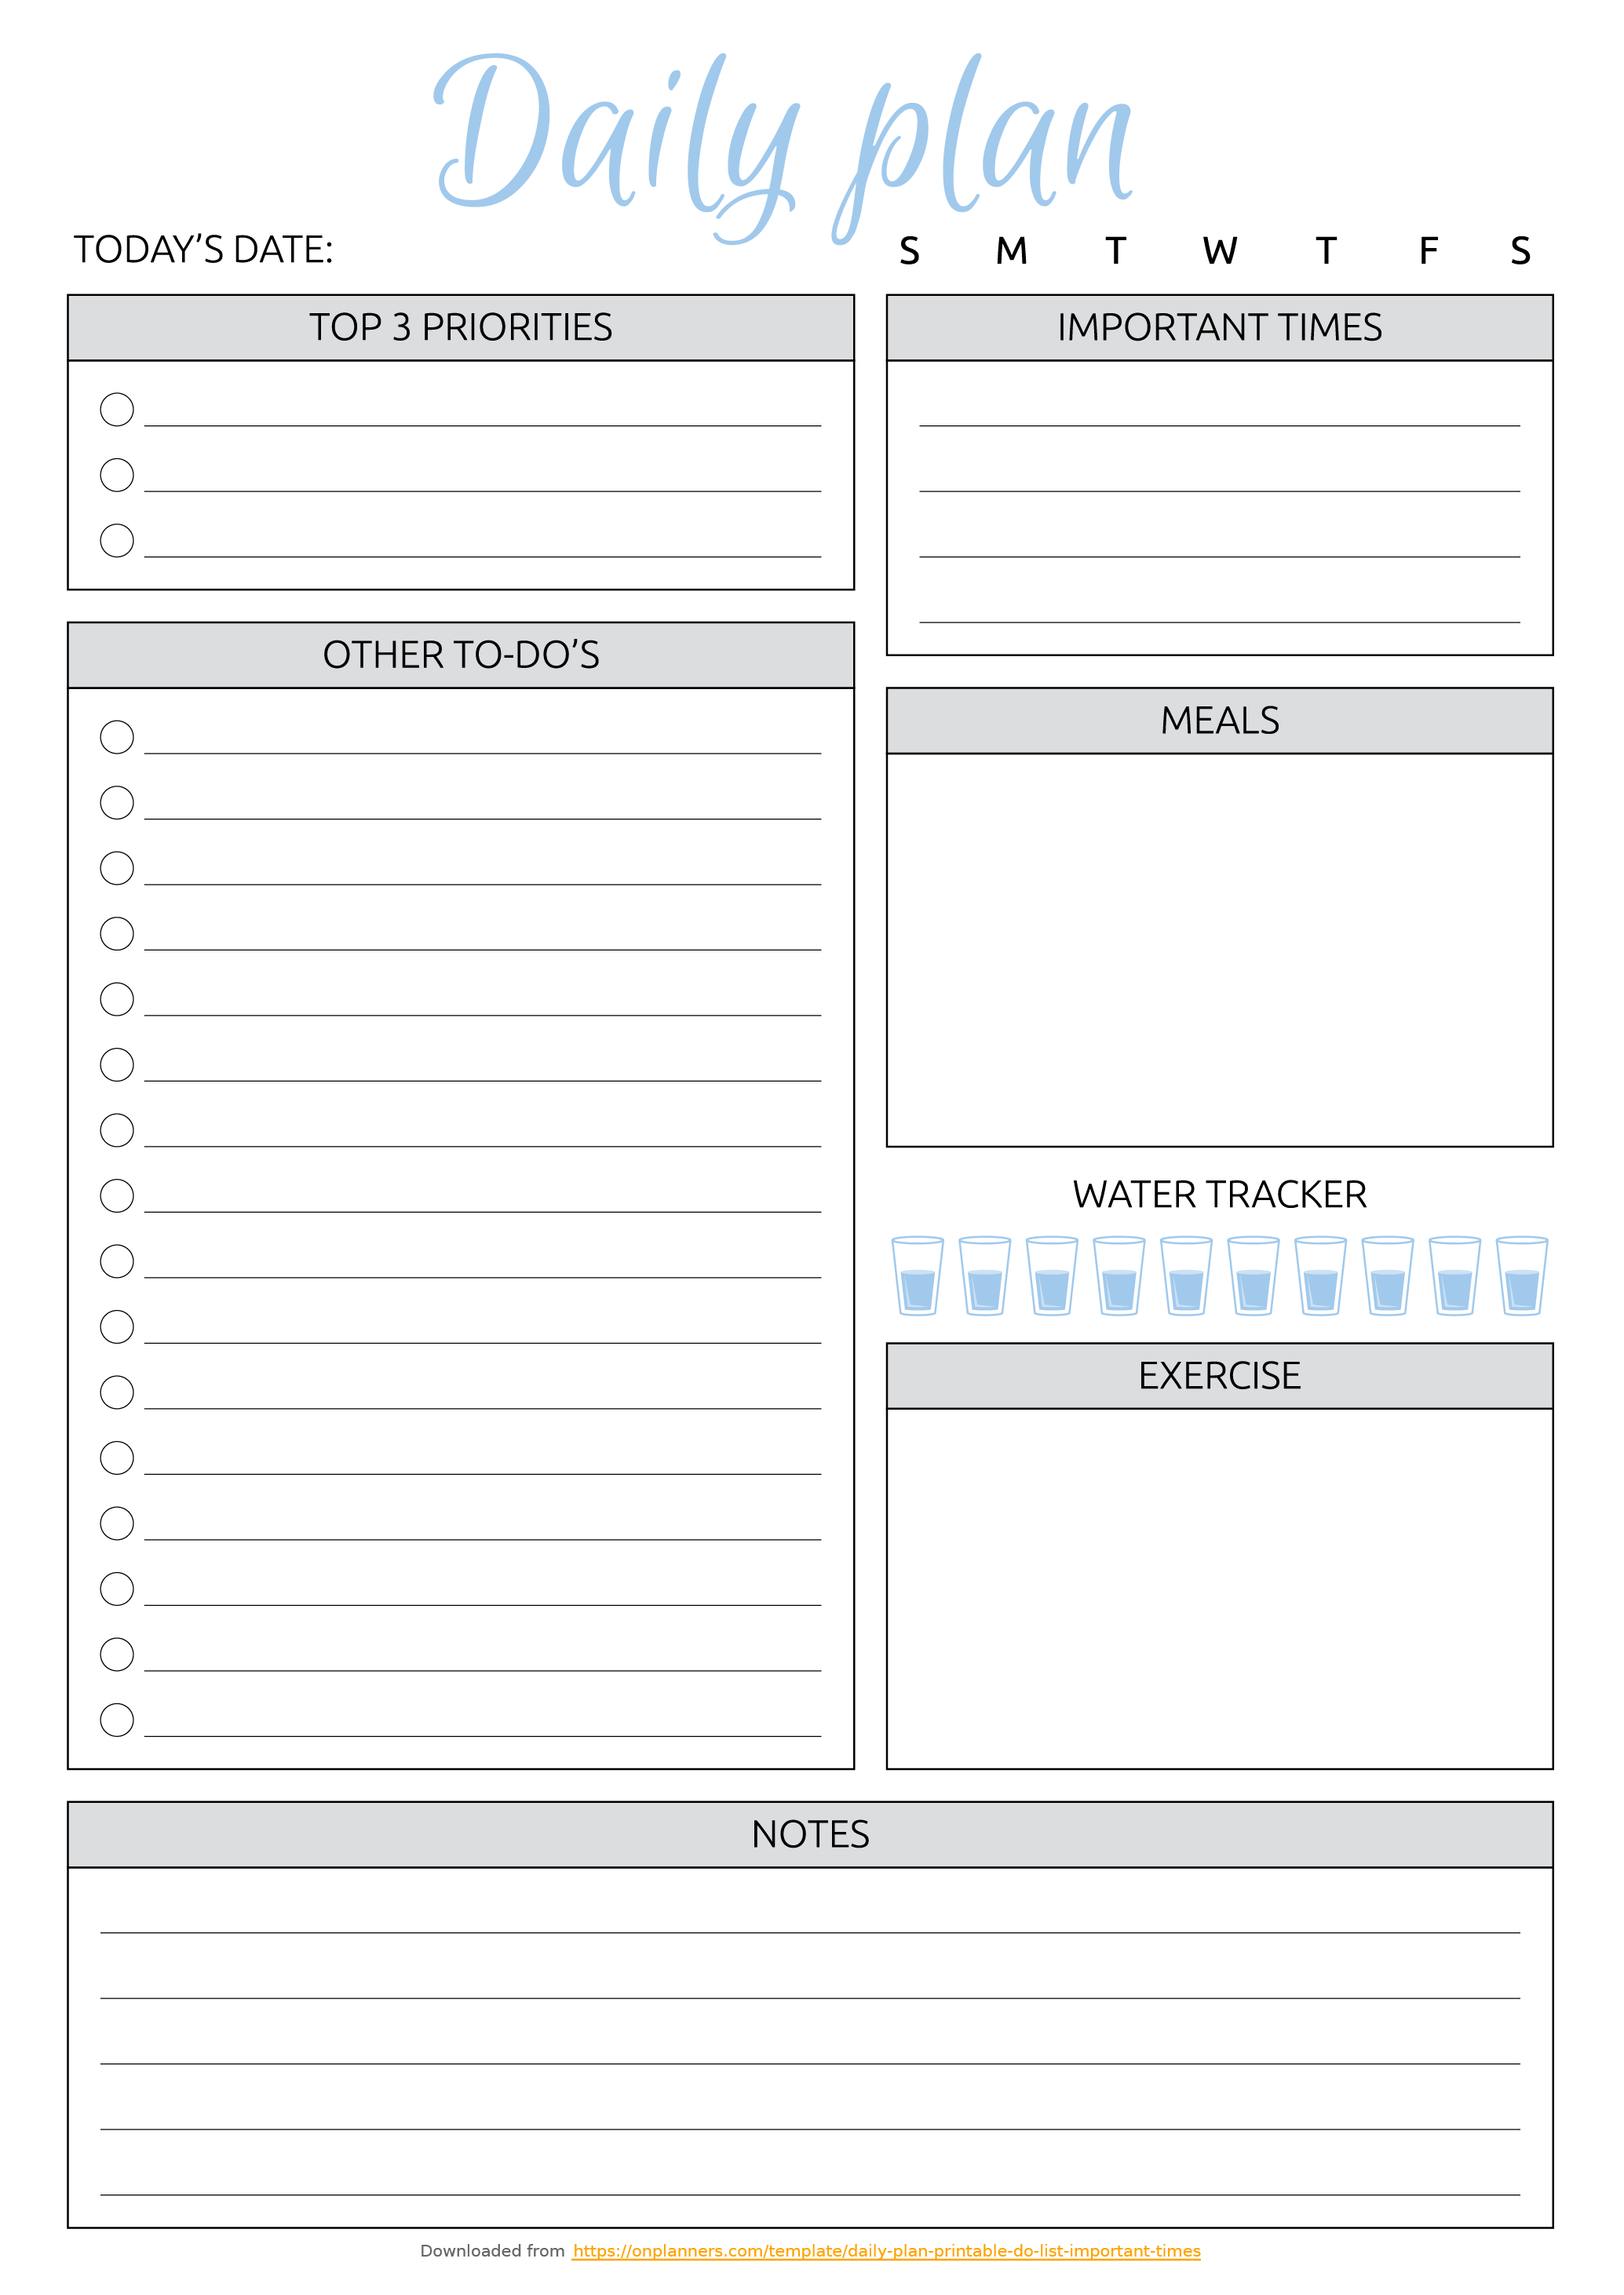 Free Printable Daily Plan With To-Do List &amp;amp; Important Times Pdf Download - Free Printable To Do List Pdf